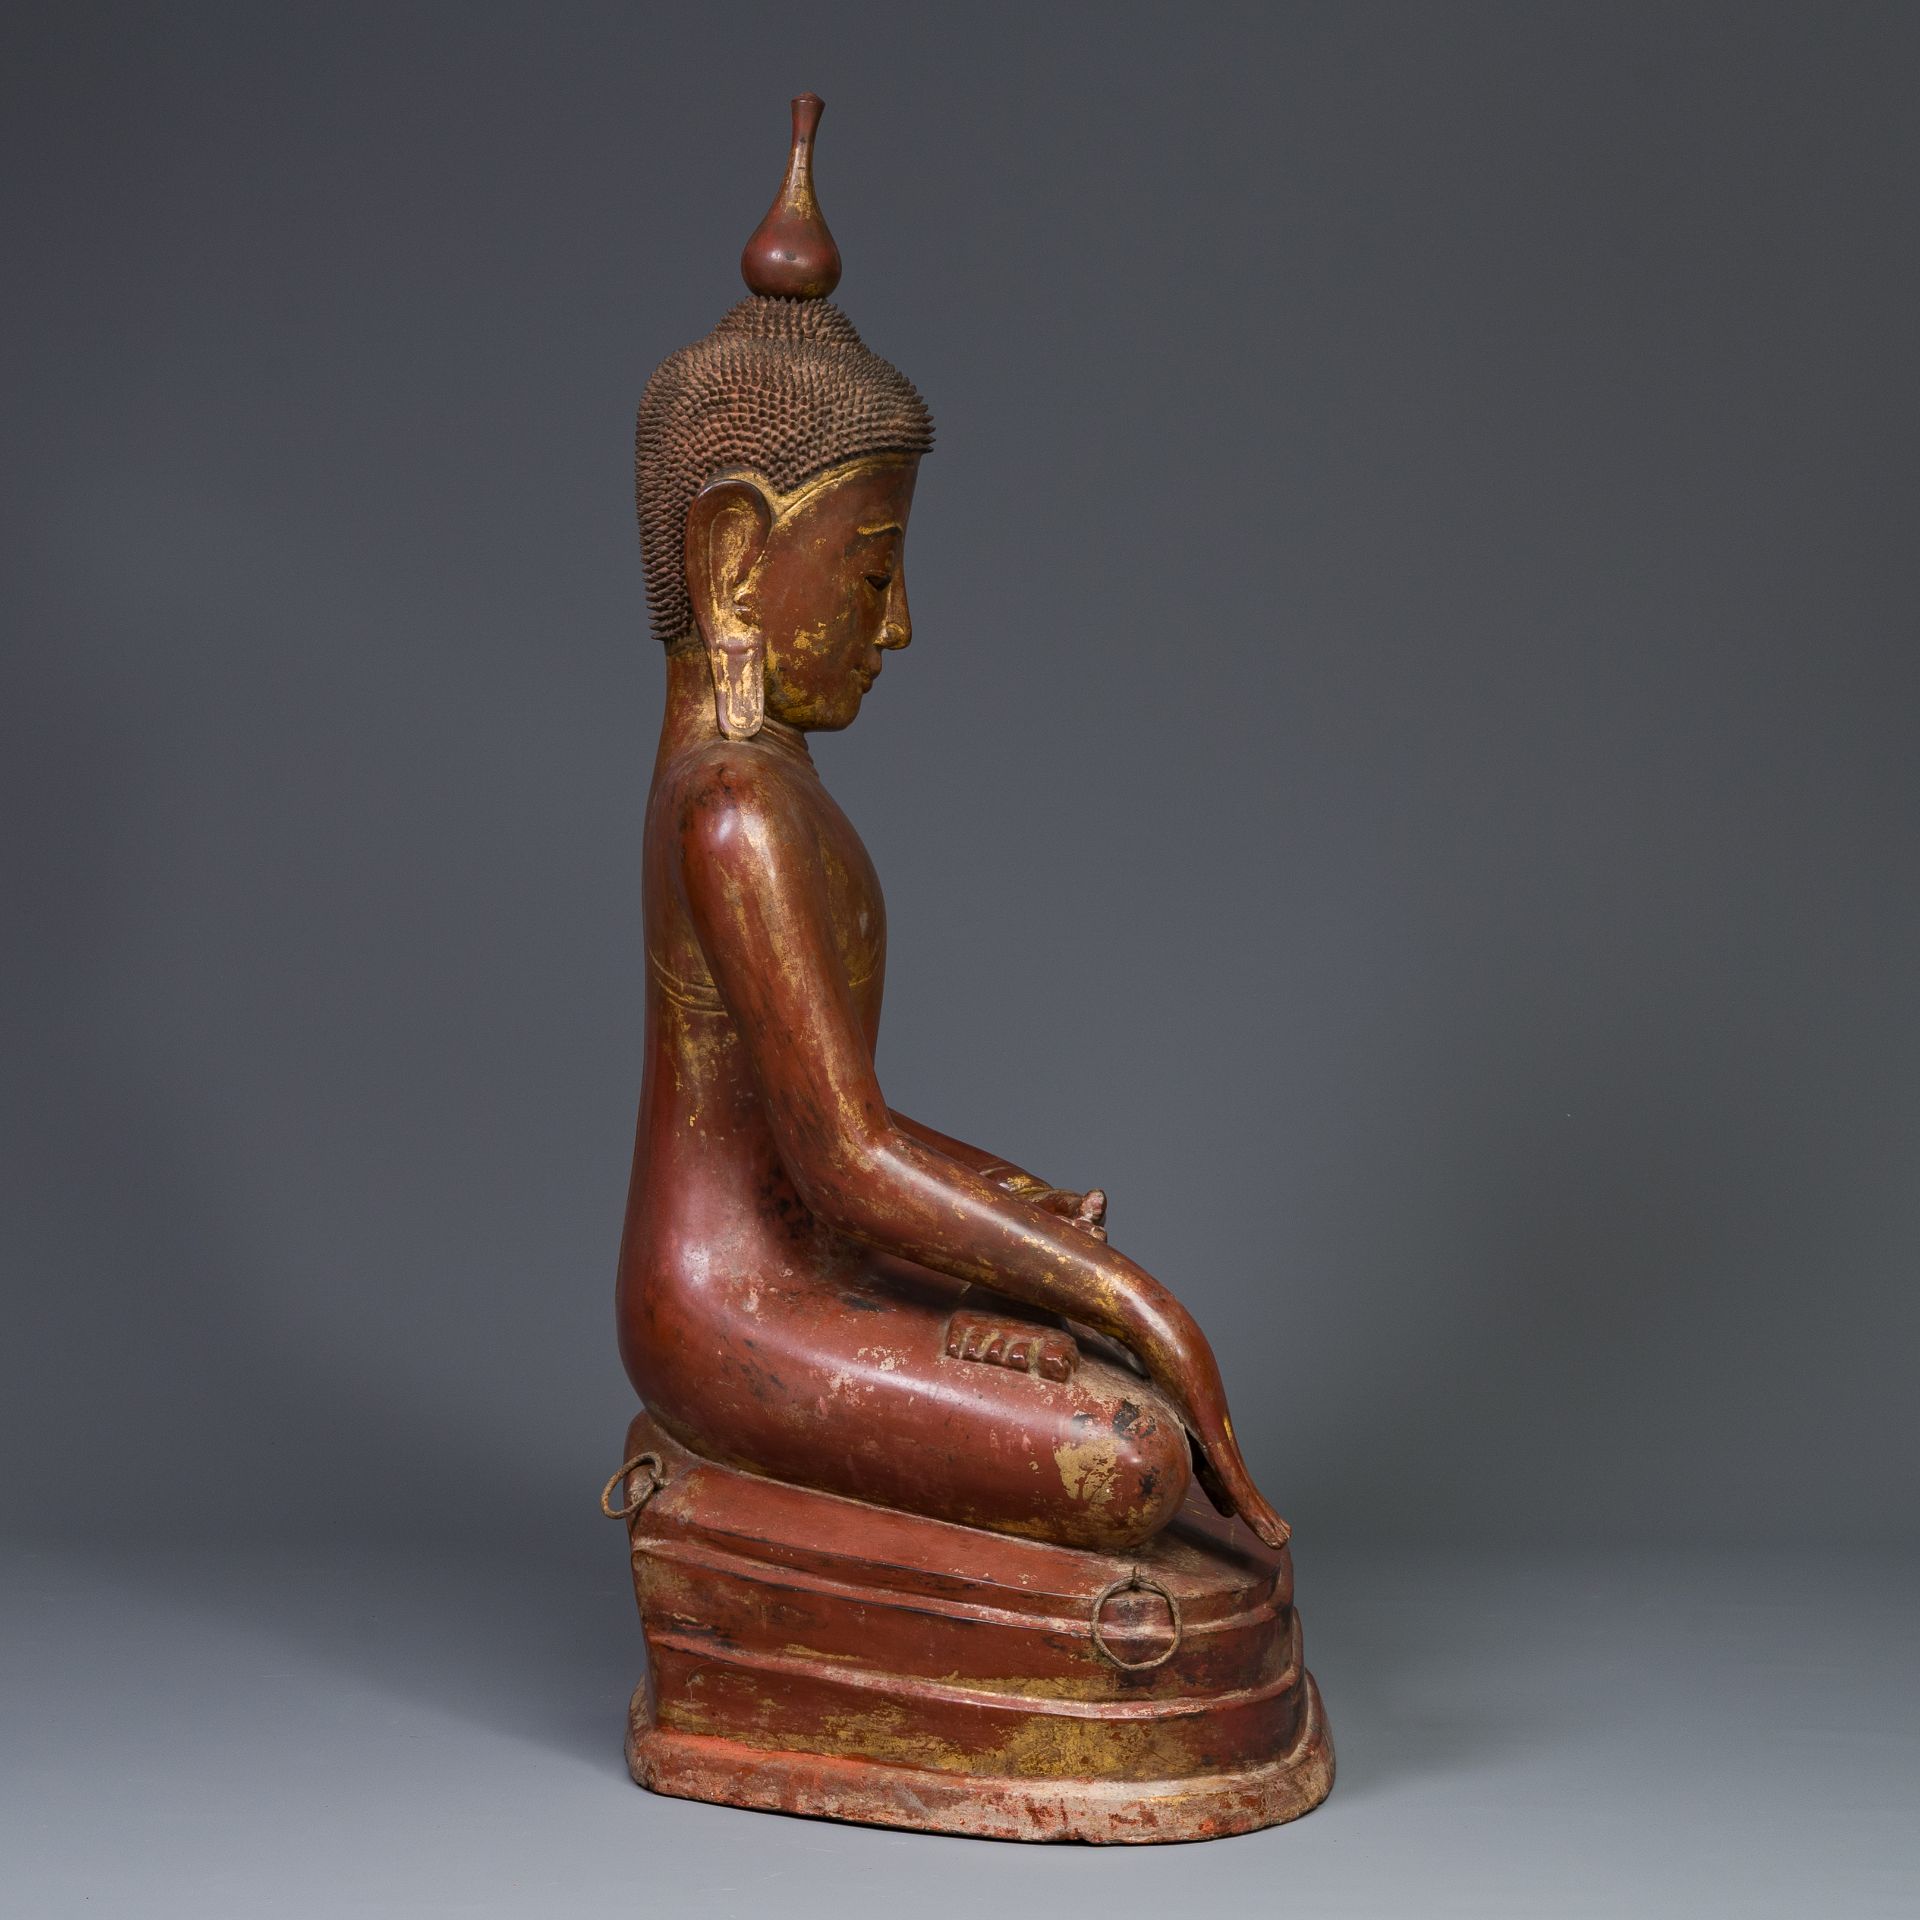 A large Burmese gilded lacquer Buddha in bhumisparsha mudra, 19/20th C. - Image 4 of 18